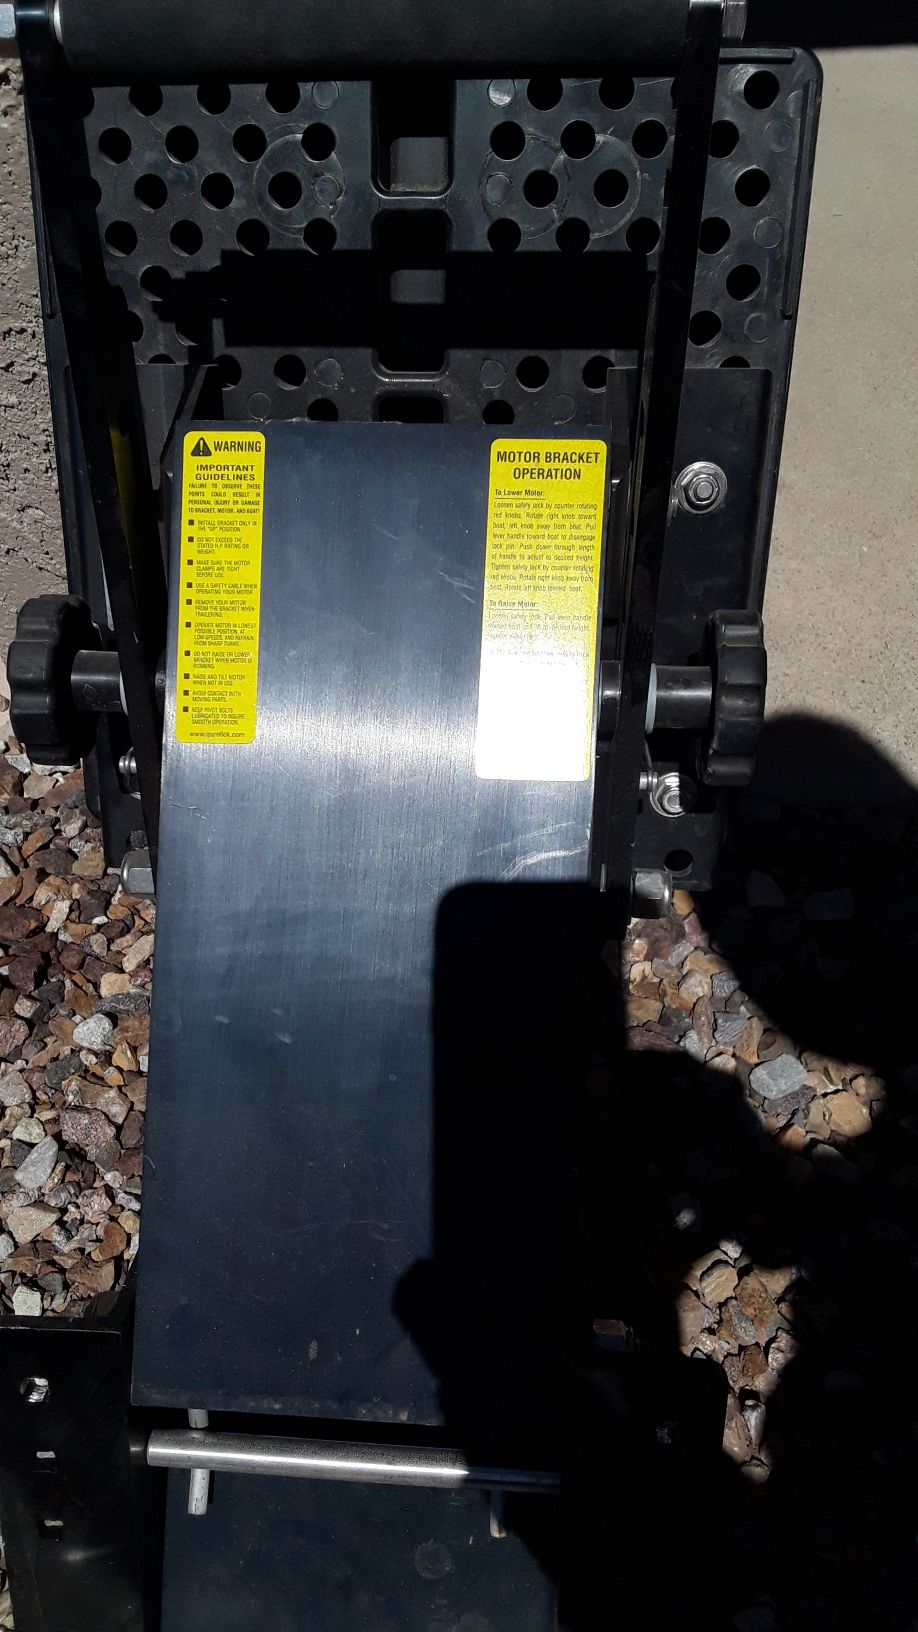 Tip down for outboard motor up to 15hp or 125 lbs {contact info removed}